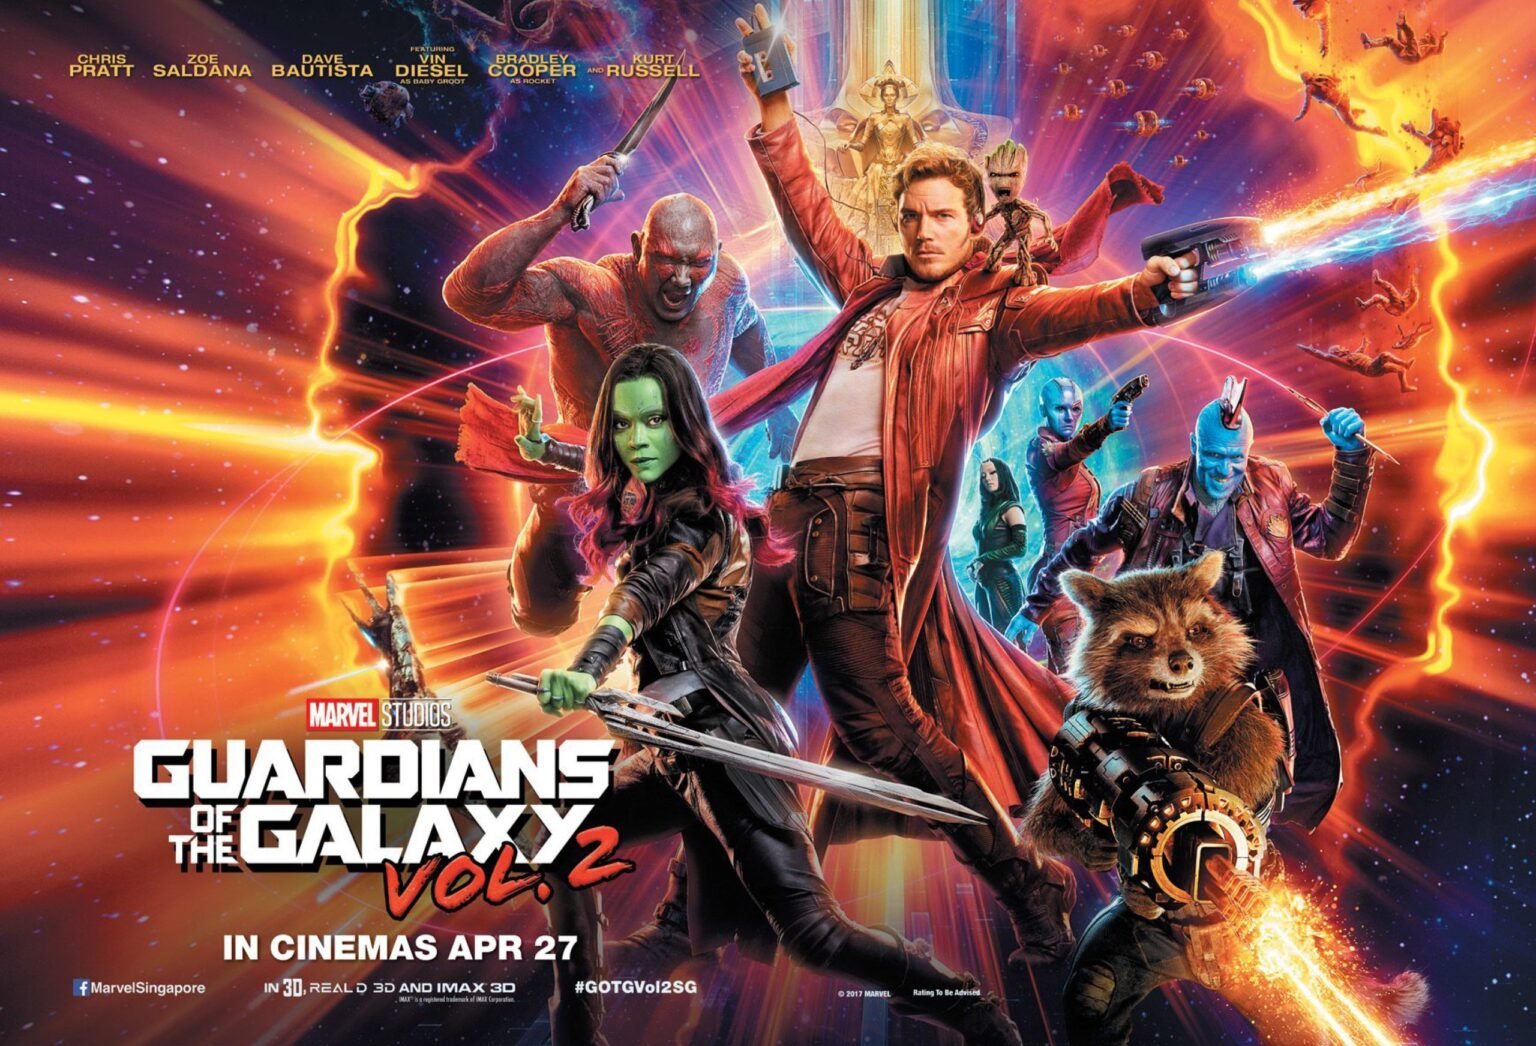 FULL MOVIE: Guardians of the Galaxy Vol. 2 (2017)